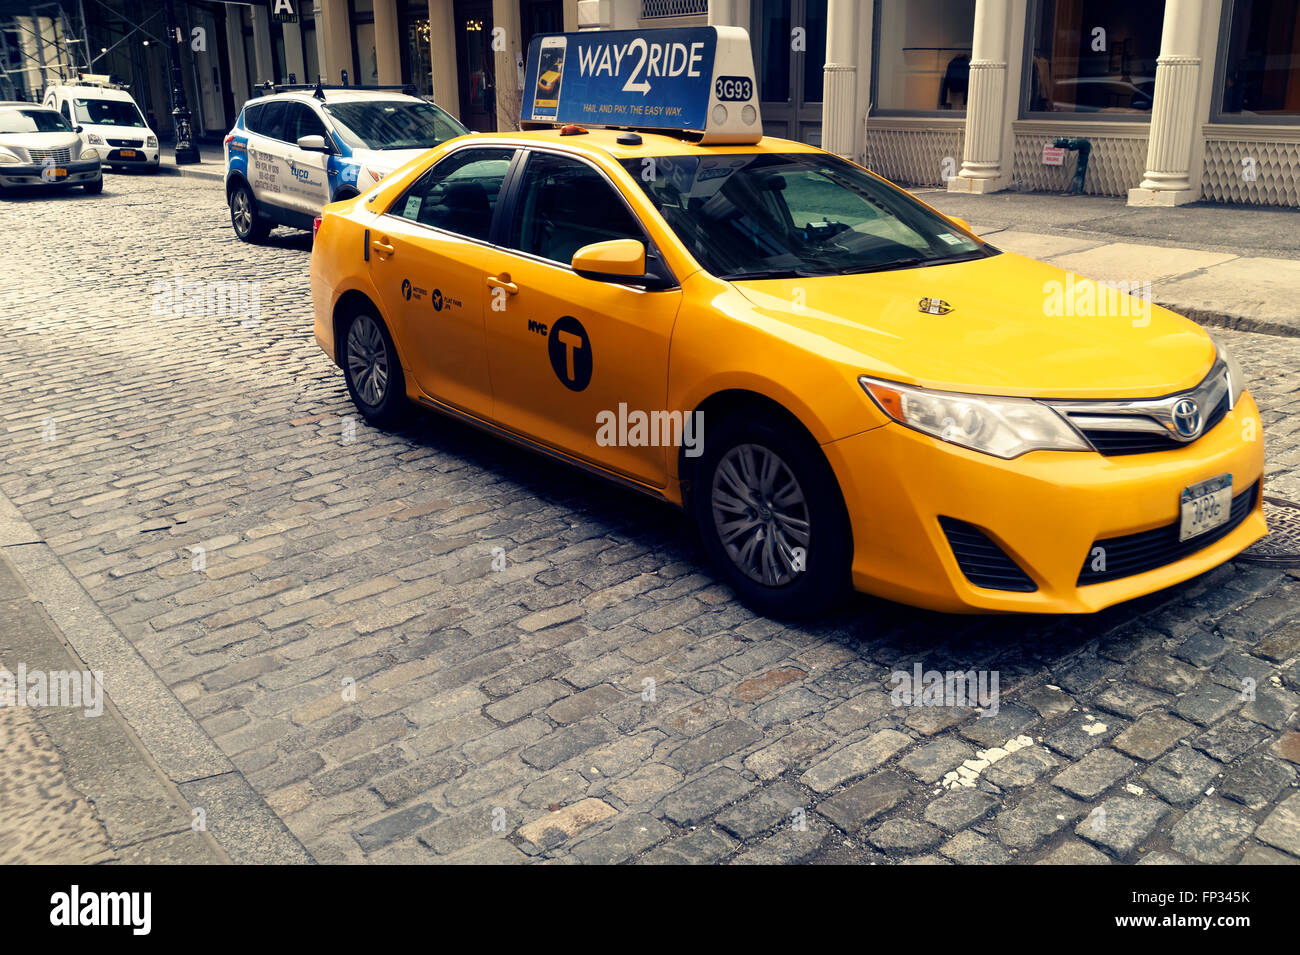 Taxi cab on cobblestone street in the Soho are in New York City. Stock Photo